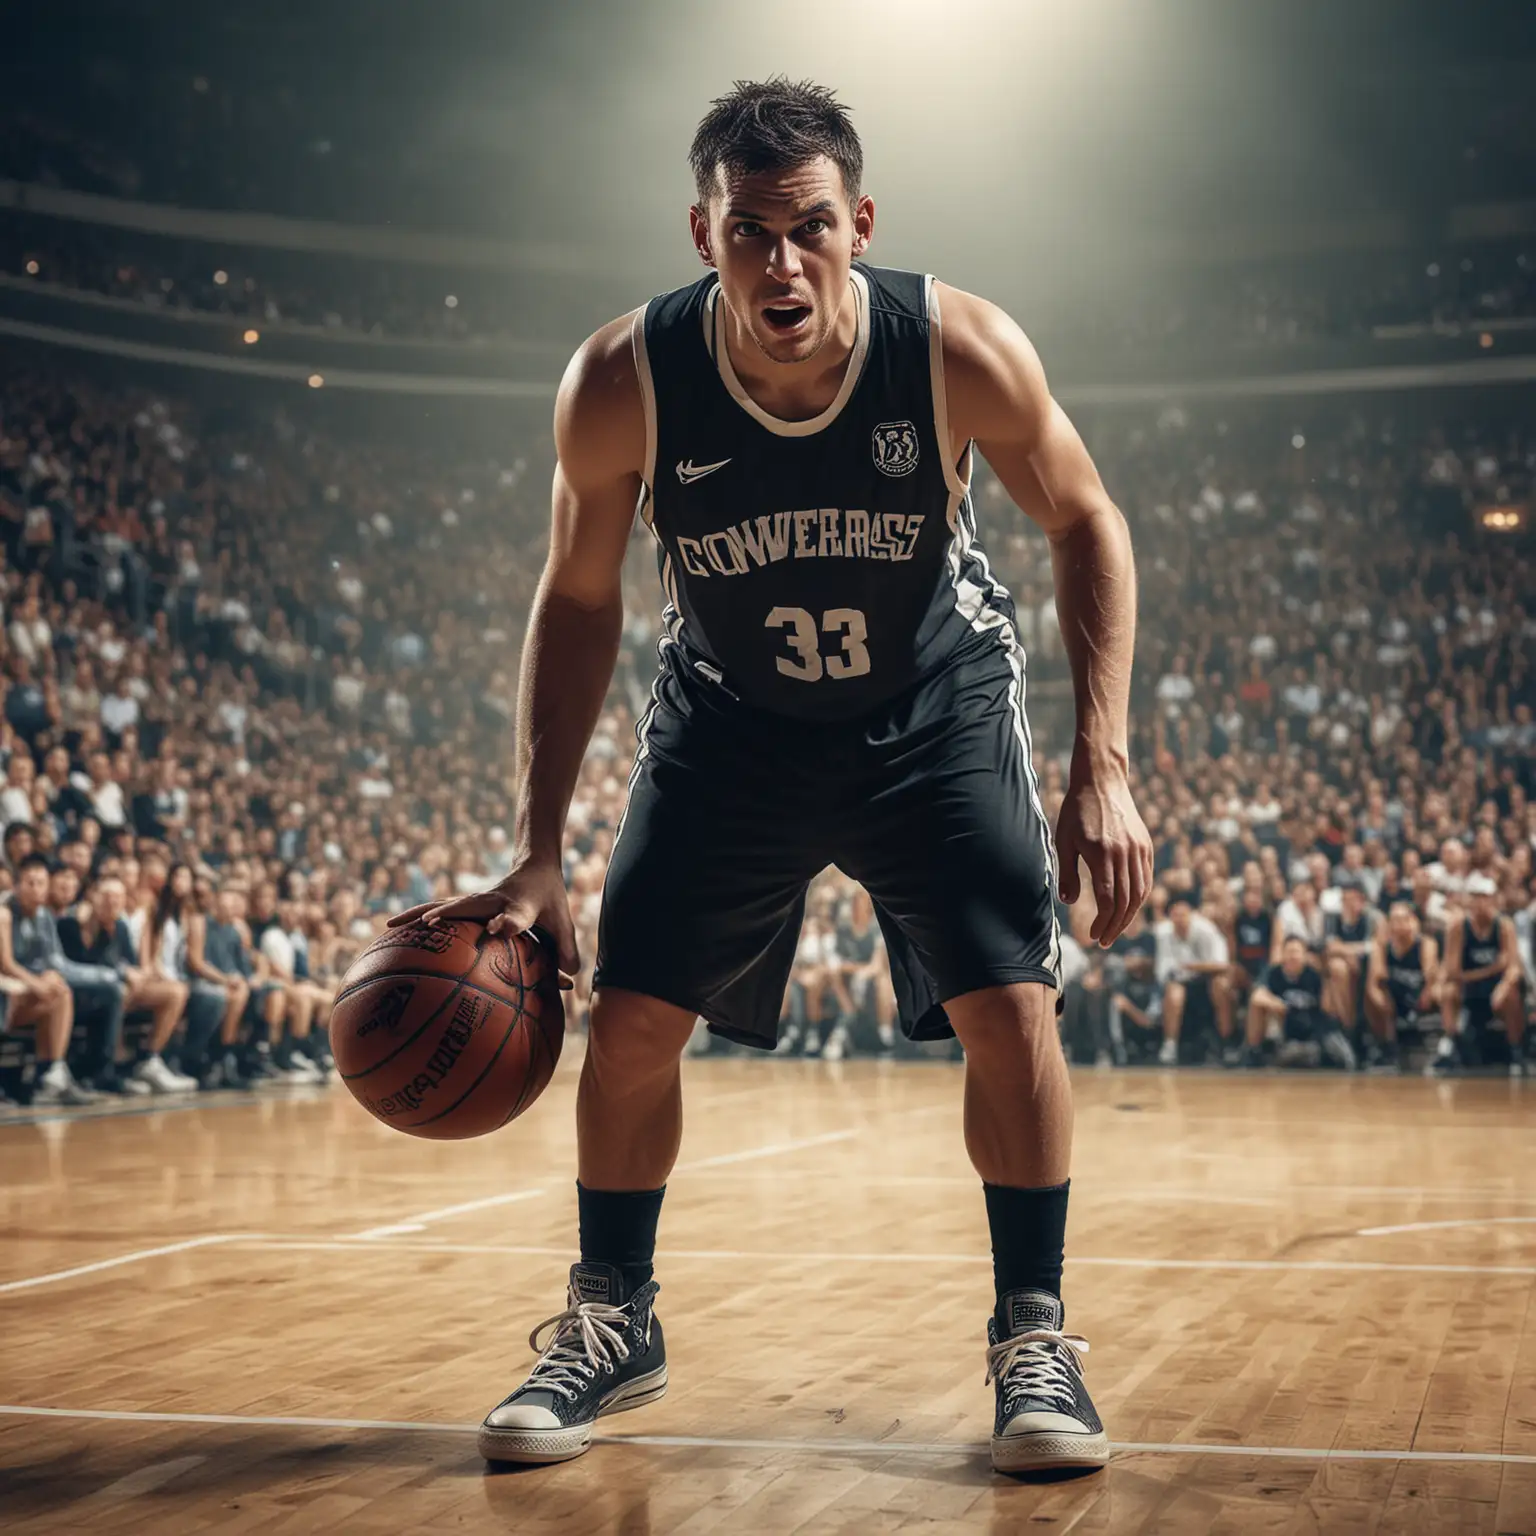 player portrait with converse shoes, angry face, basketball stadium background, crowd, cinematic lighting